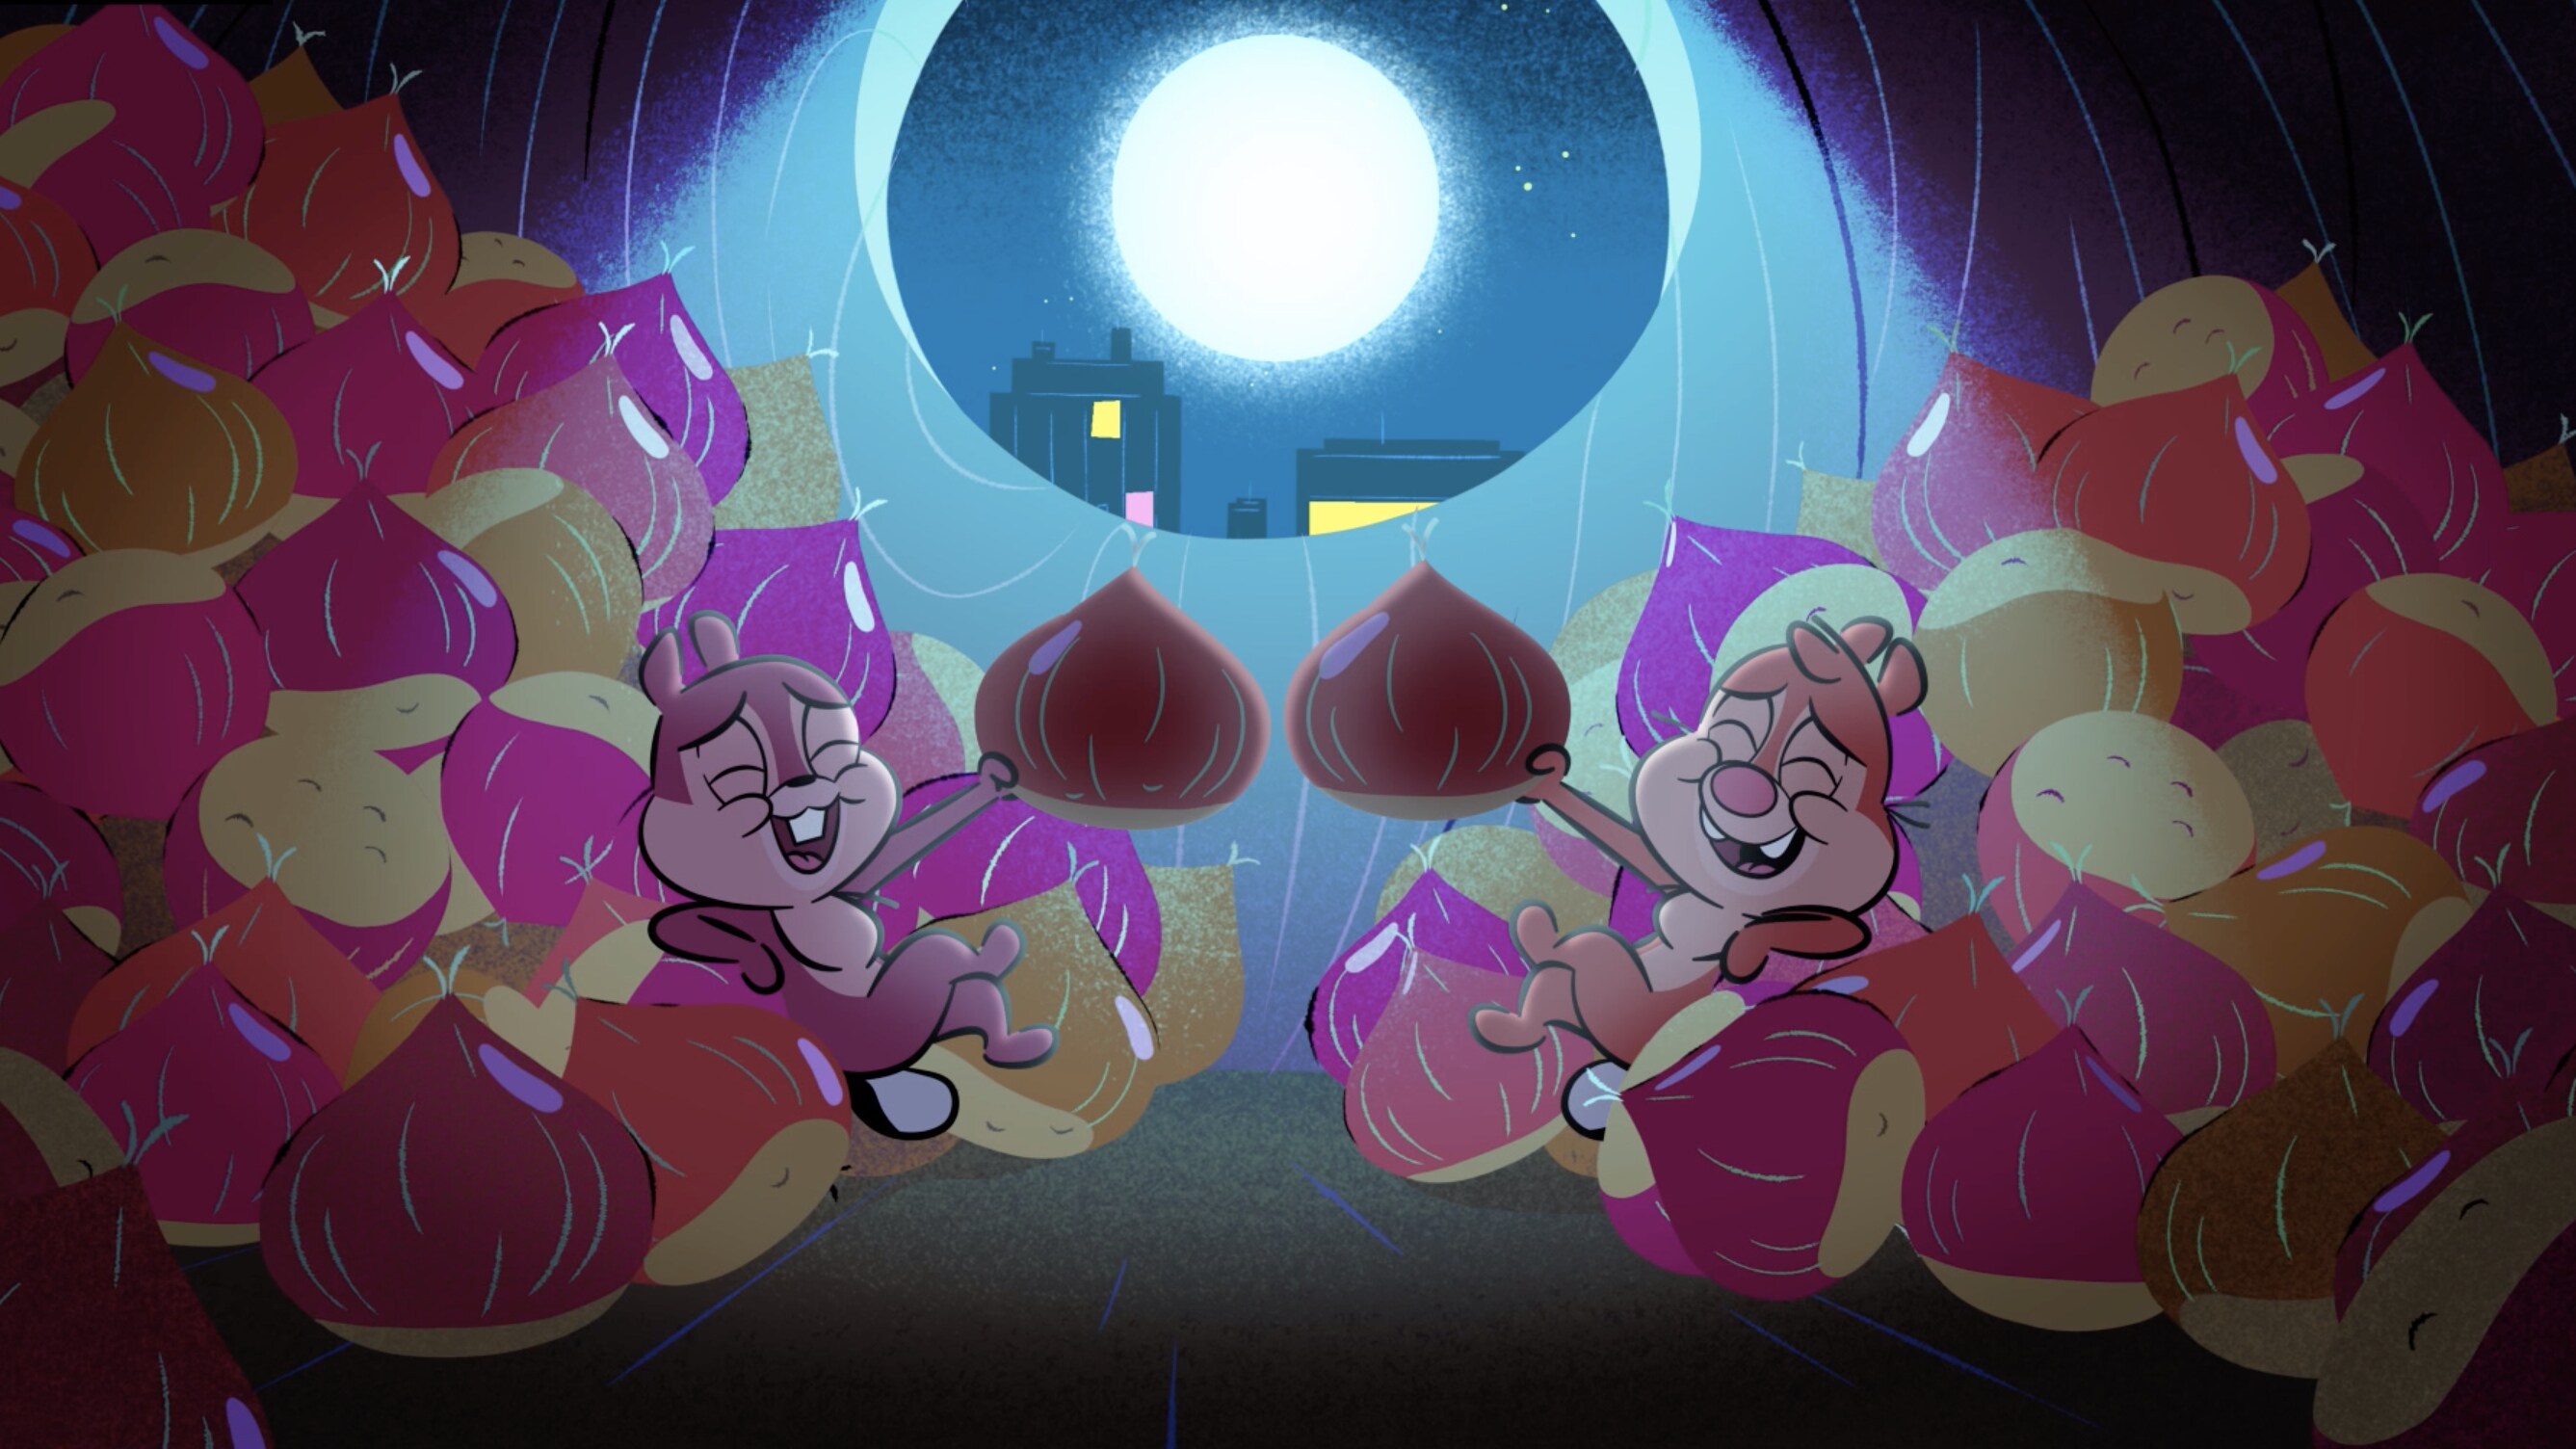 CHIP ‘N’ DALE: PARK LIFE - "Dog in the House / Cone Alone / Highway to Hugs" - Pluto is an unwelcome guest / Dale’s lie makes his life miserable / Dale needs a hug. (Disney) CHIP, DALE